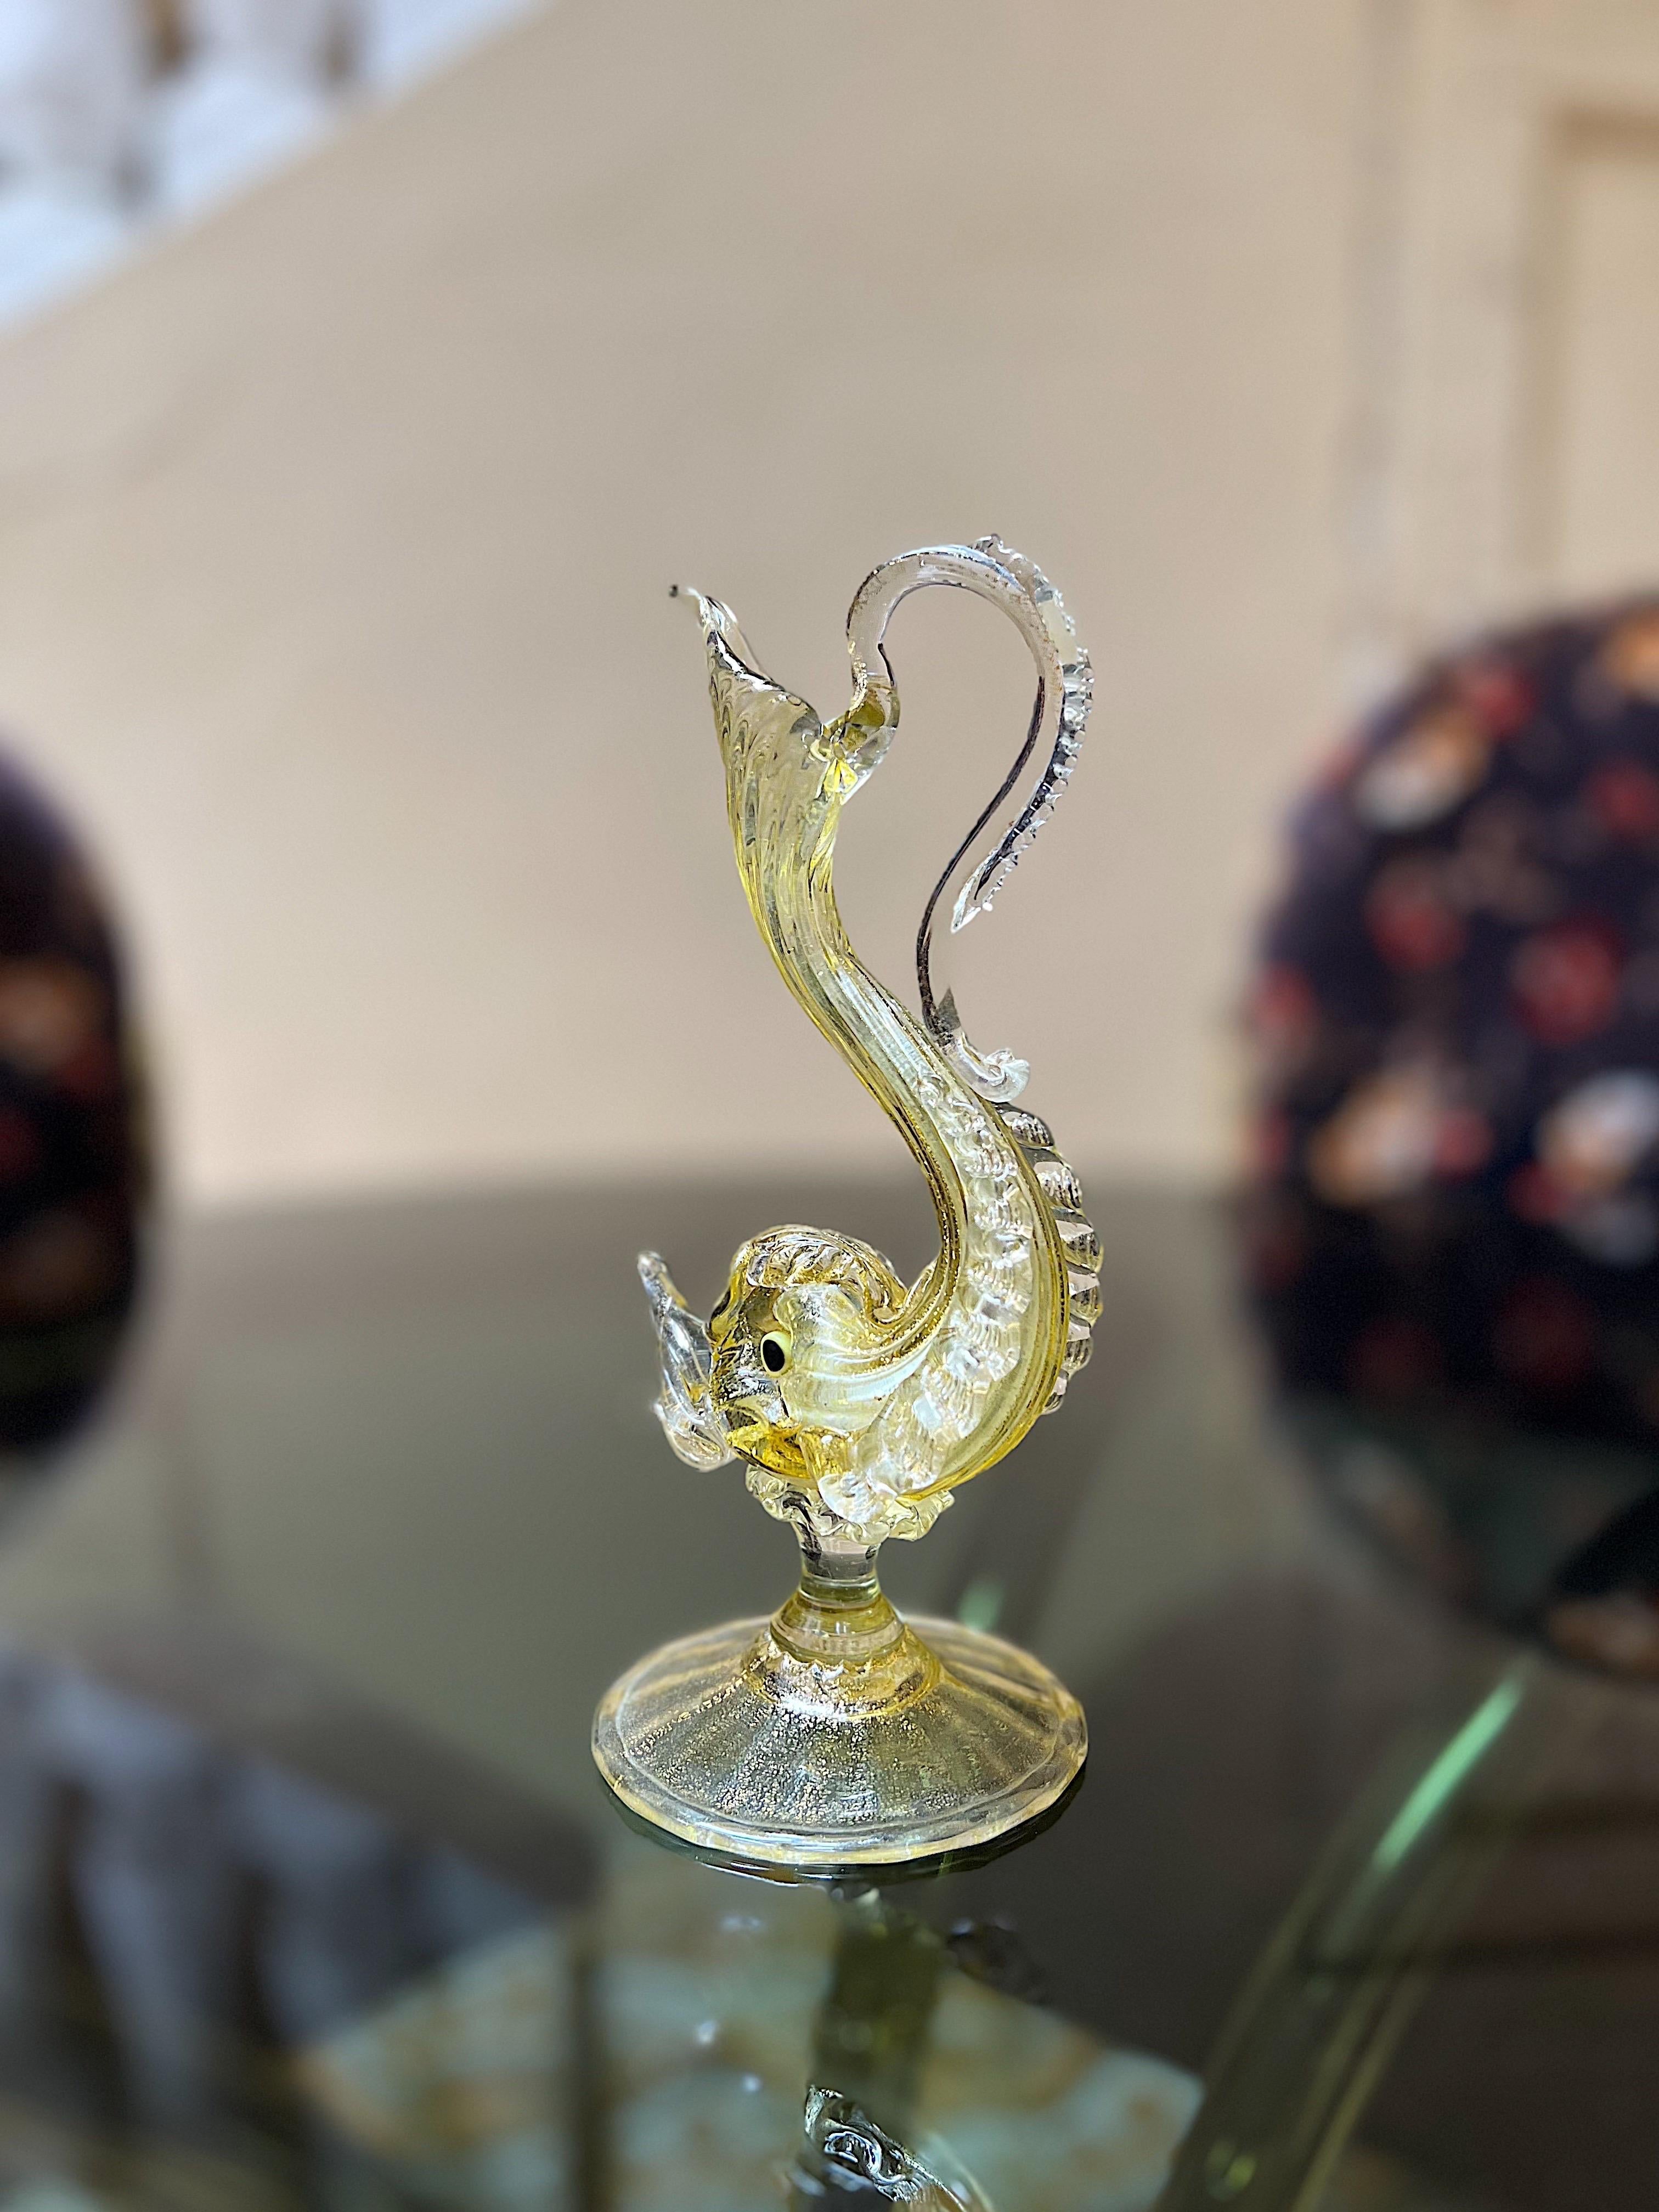 An exceptional example of Venetian glassblowing mastery, this mini caraffe made by Antonio Salviati is sure to impress! All handblown elements are fused together to create this masterpiece.

The detail and workmanship is outstanding. The dolphin